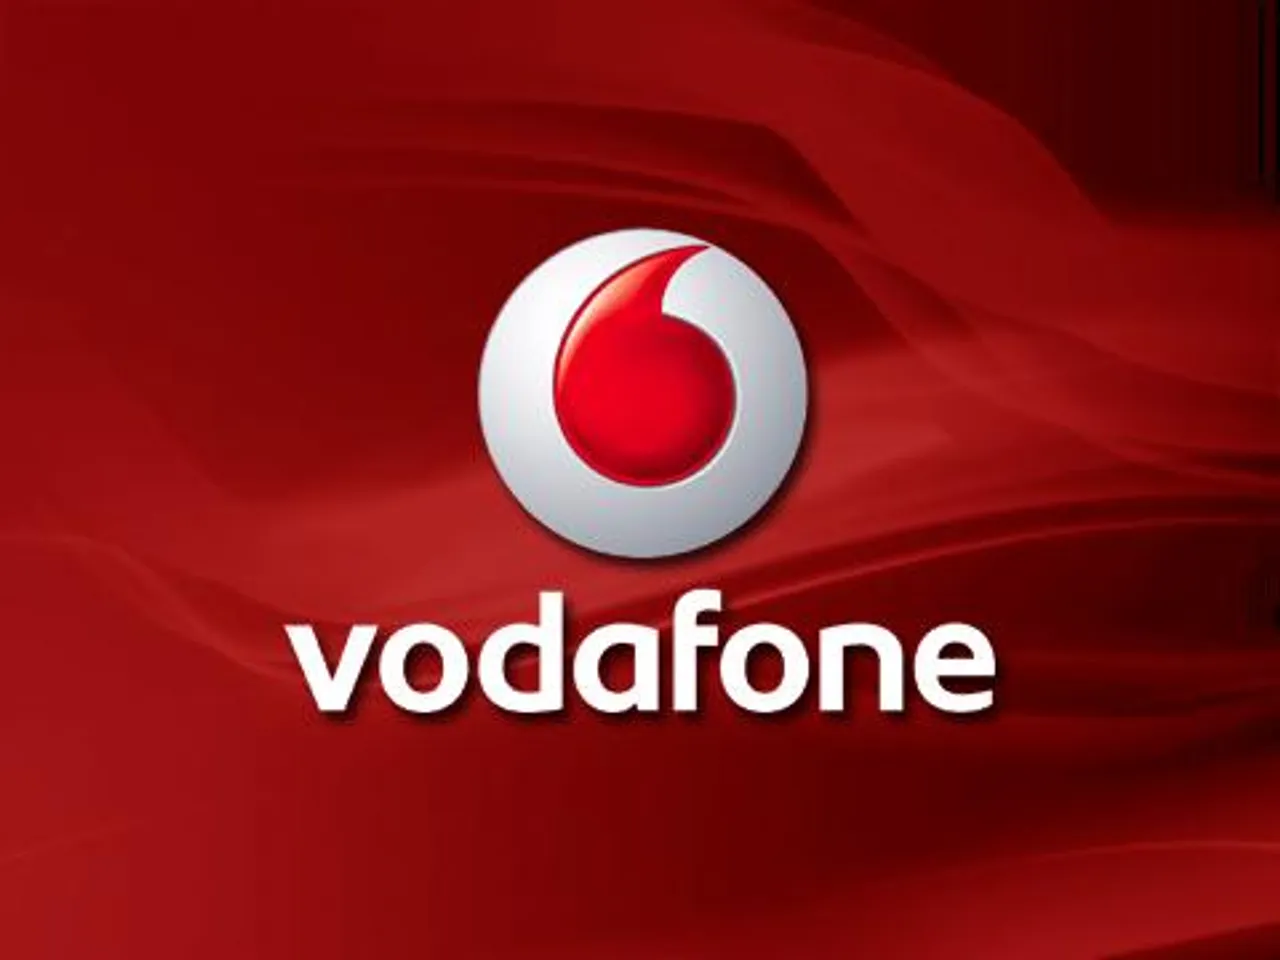 Vodafone's new Rs 21 plan offers unlimited data for 60 min